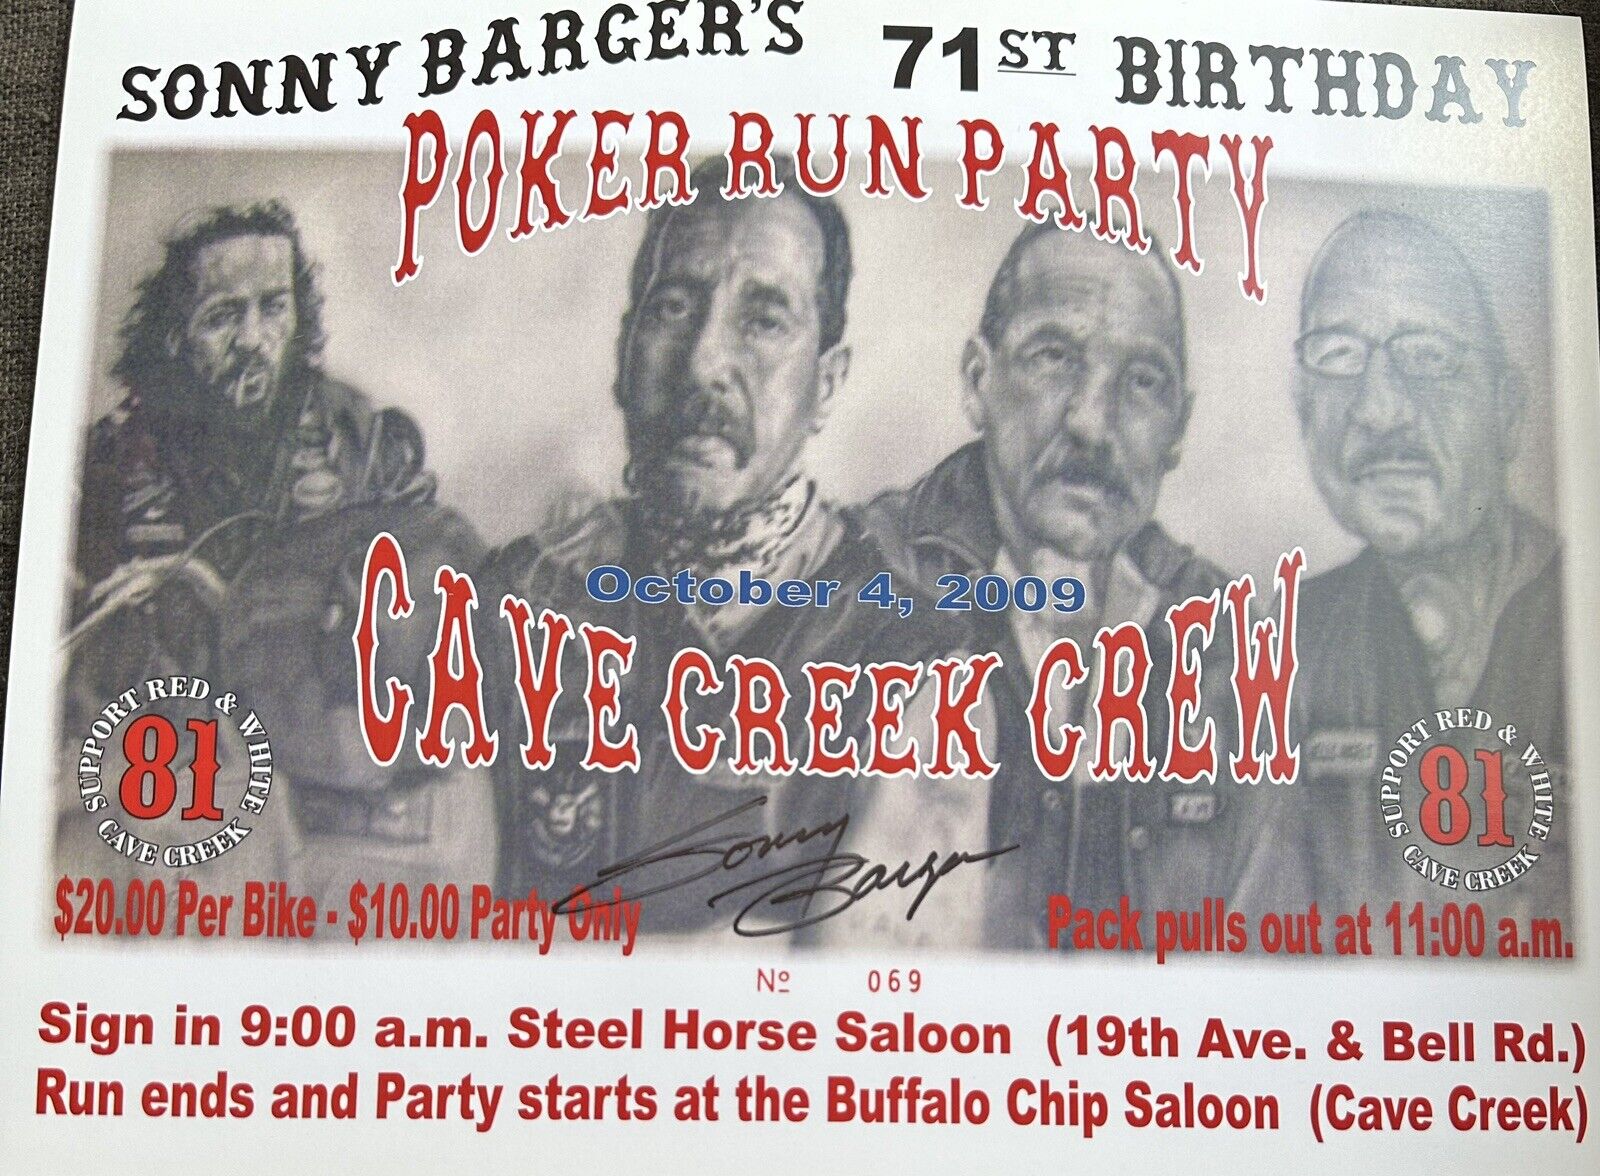 Sonny Barger Hells Angels  Signed This Poster From His 71st Birthday. Number 69